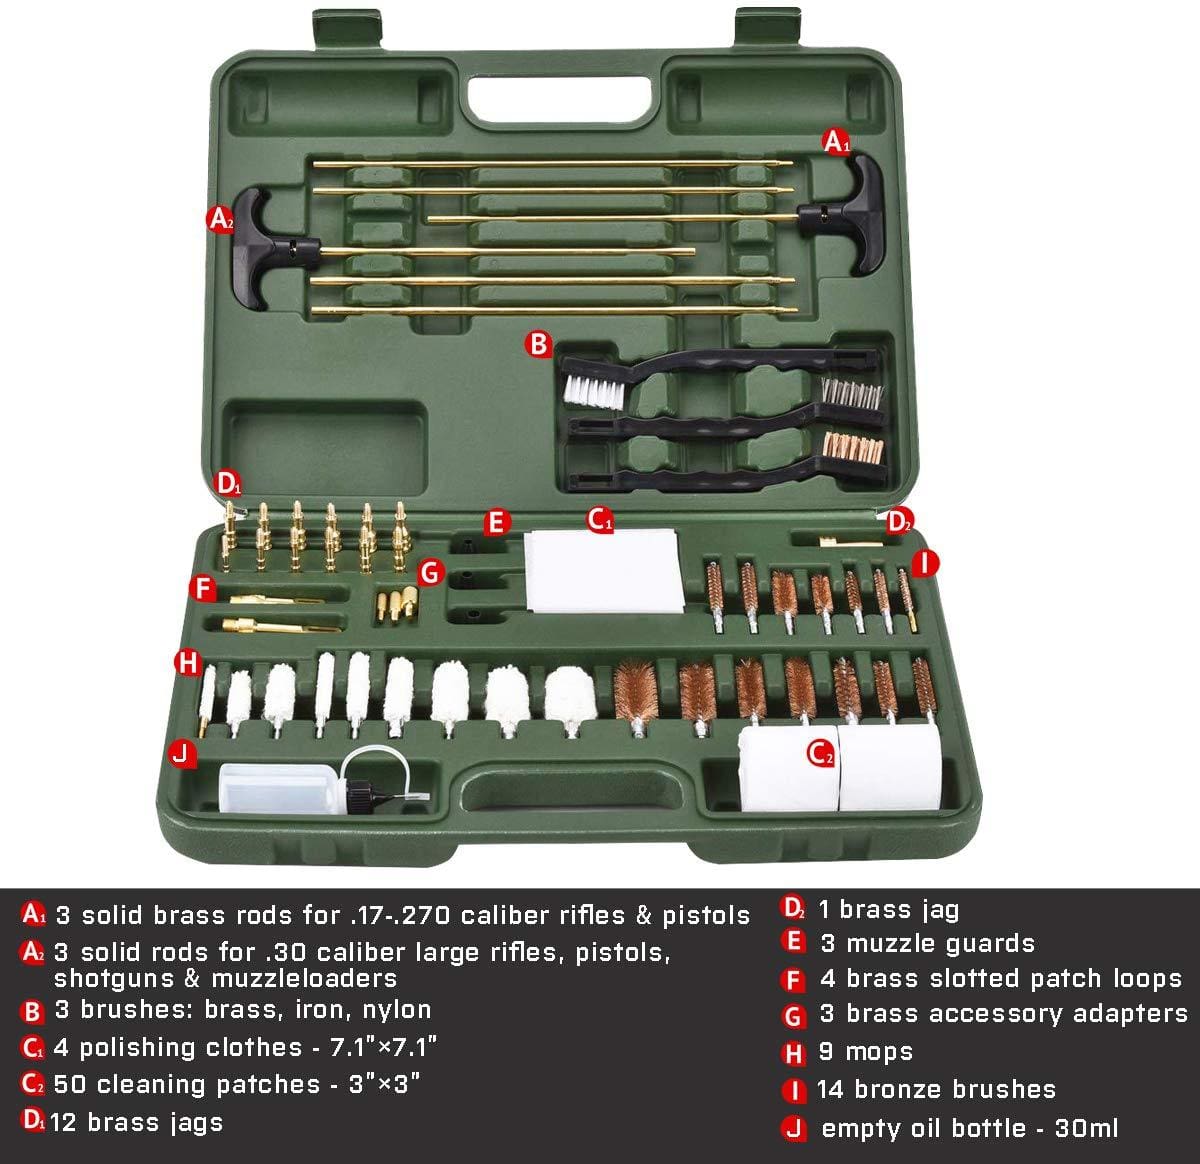 BOW-TAC tactical cleaning kits - Green universal gun cleaning kit - Instruction